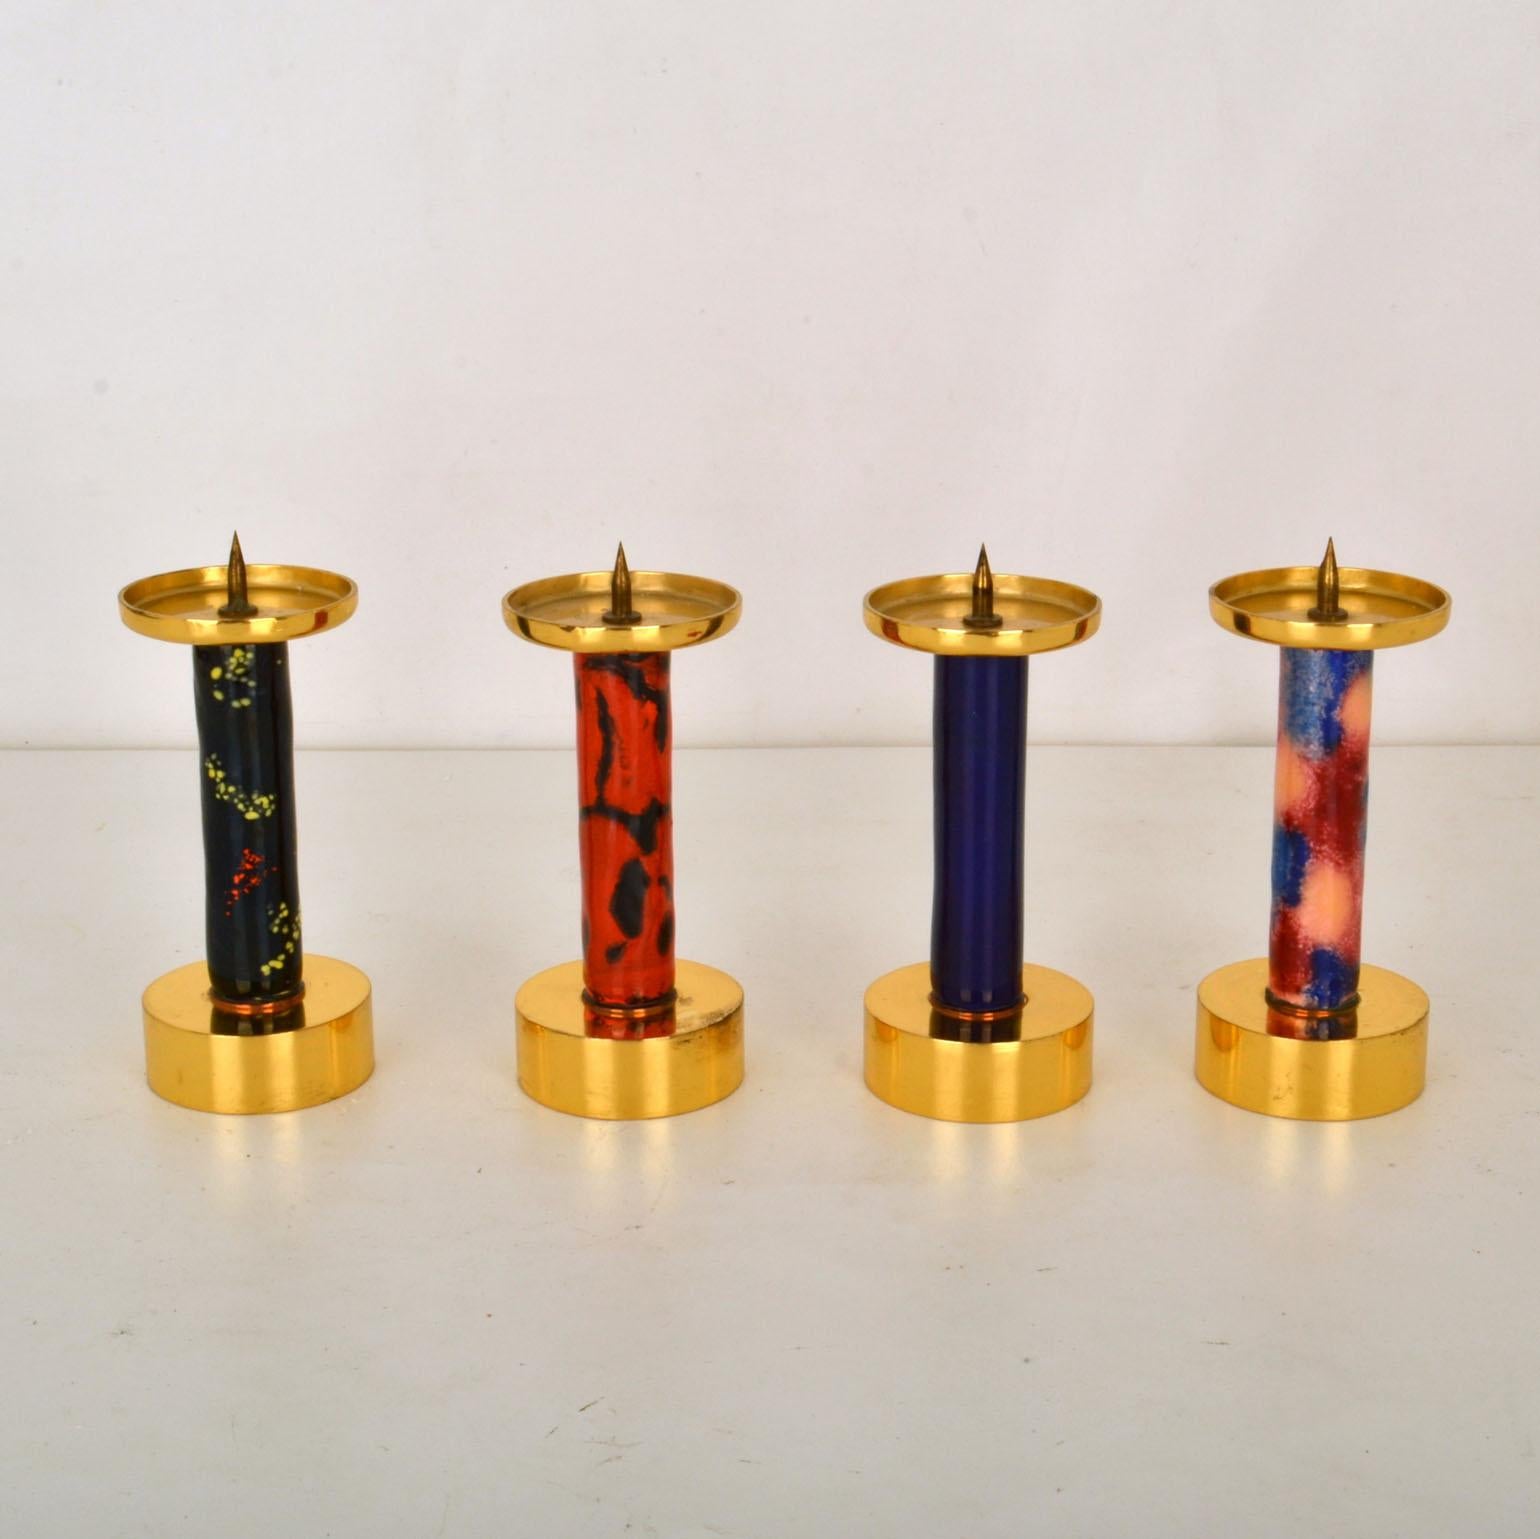 The simply formed gilded brass candlesticks are colorful decorated in enamels in red, black and blue. This age old traditional of enameling is taught and preserved by extremely skilled craftsmen. The process of vitreous enamels was developed by the